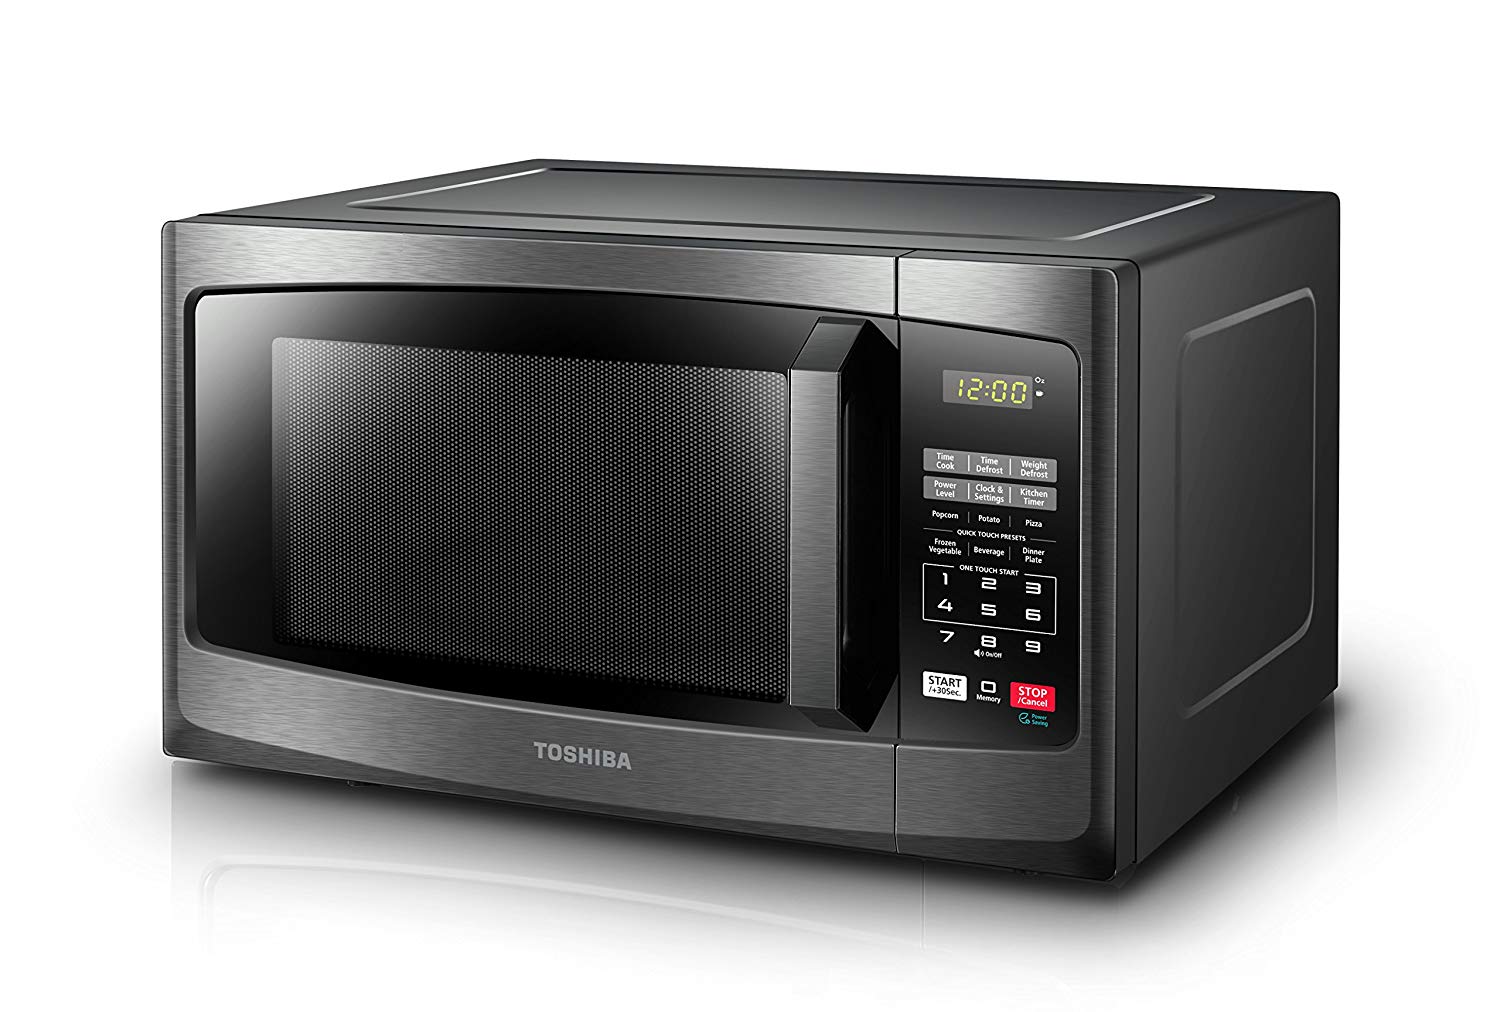 Healthy Toshiba Microwave Oven with Sound On/Off ECO Mode and LED Lighting